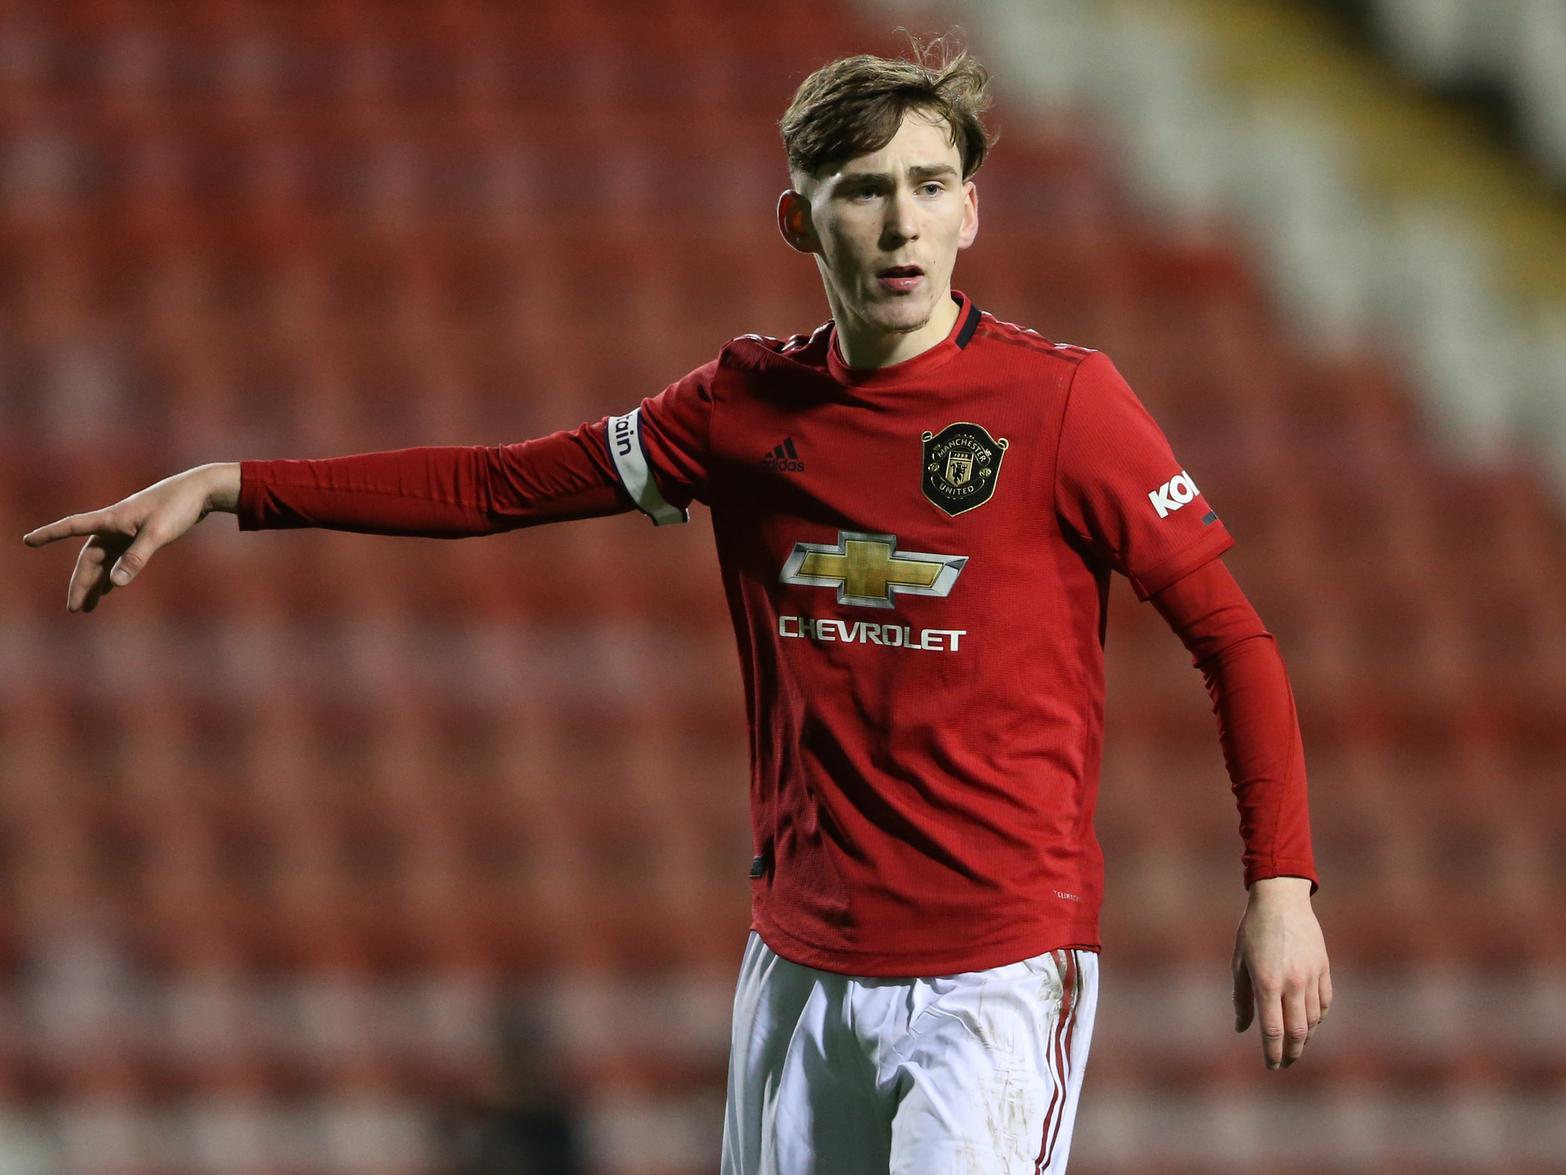 Sunderland have been linked with Manchester United youngster James Garner this month - but will face a battle to land his signature. (Sunderland Echo)